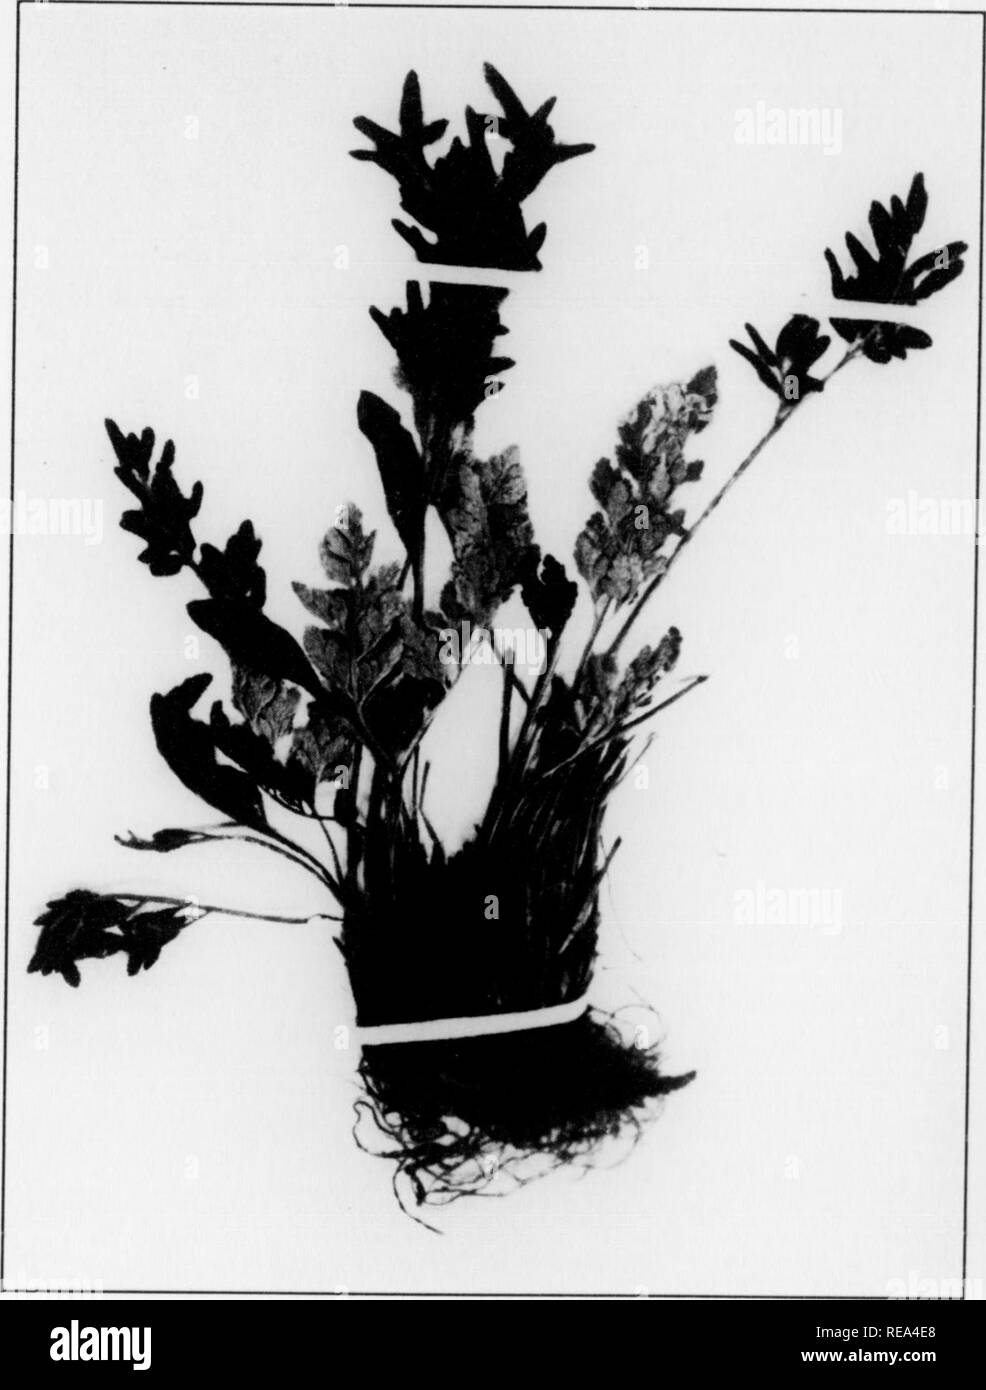 . Contributions from the Botanical Laboratory, vol. 7. Botany; Botany. 3- 24 JOHN W. HARSHBERGER grassy bank to prevent the sods of grass from slipping down. One plant of this group was collected by the writer. Cryptogramma acrostichoides R. Br. The parsley fern has a tufted habit with fertile fronds taller than the sterile. The numerous stipes are straw colored. This common fern grows abundantly on the screes above Lake Agnes in the Canadian Rocky mountains and was collected there (Fig. 7). It is a typical scree-banker. Addenda A few notes should be added about a few scree plants of Aha Peak, Stock Photo